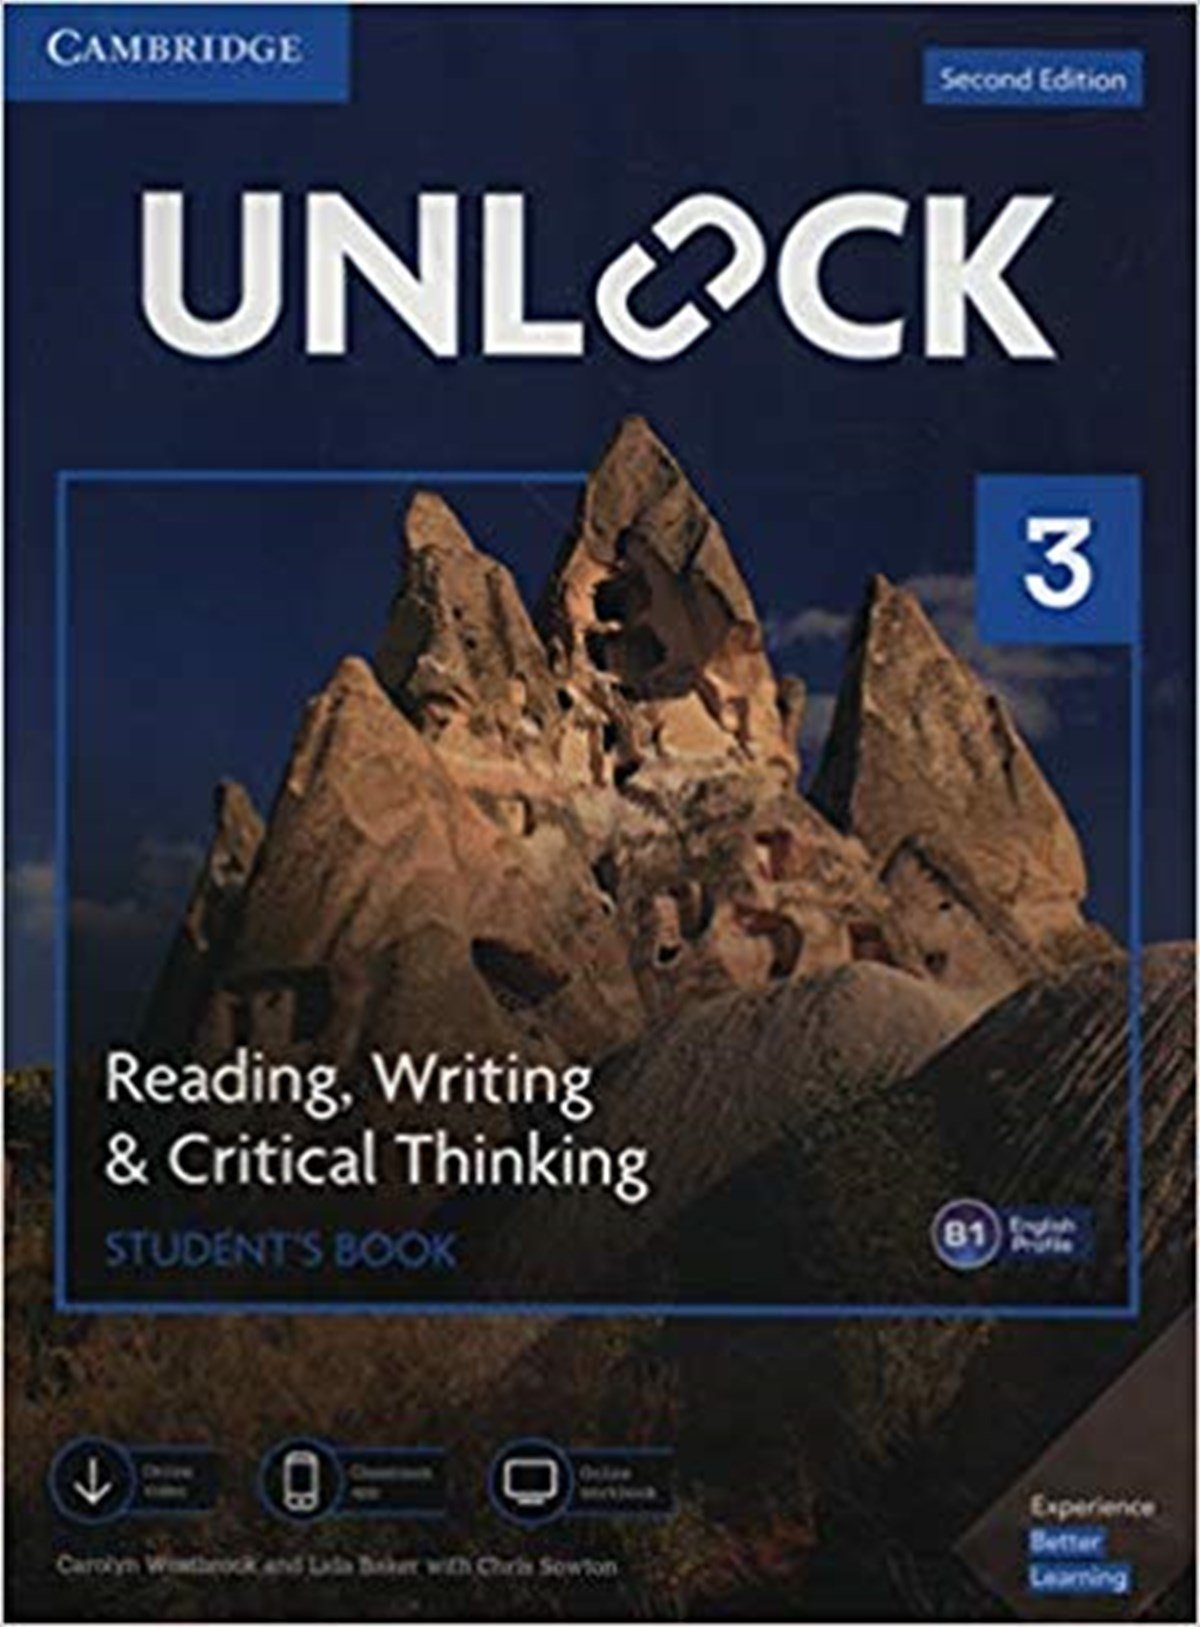 unlock 3 reading writing and critical thinking